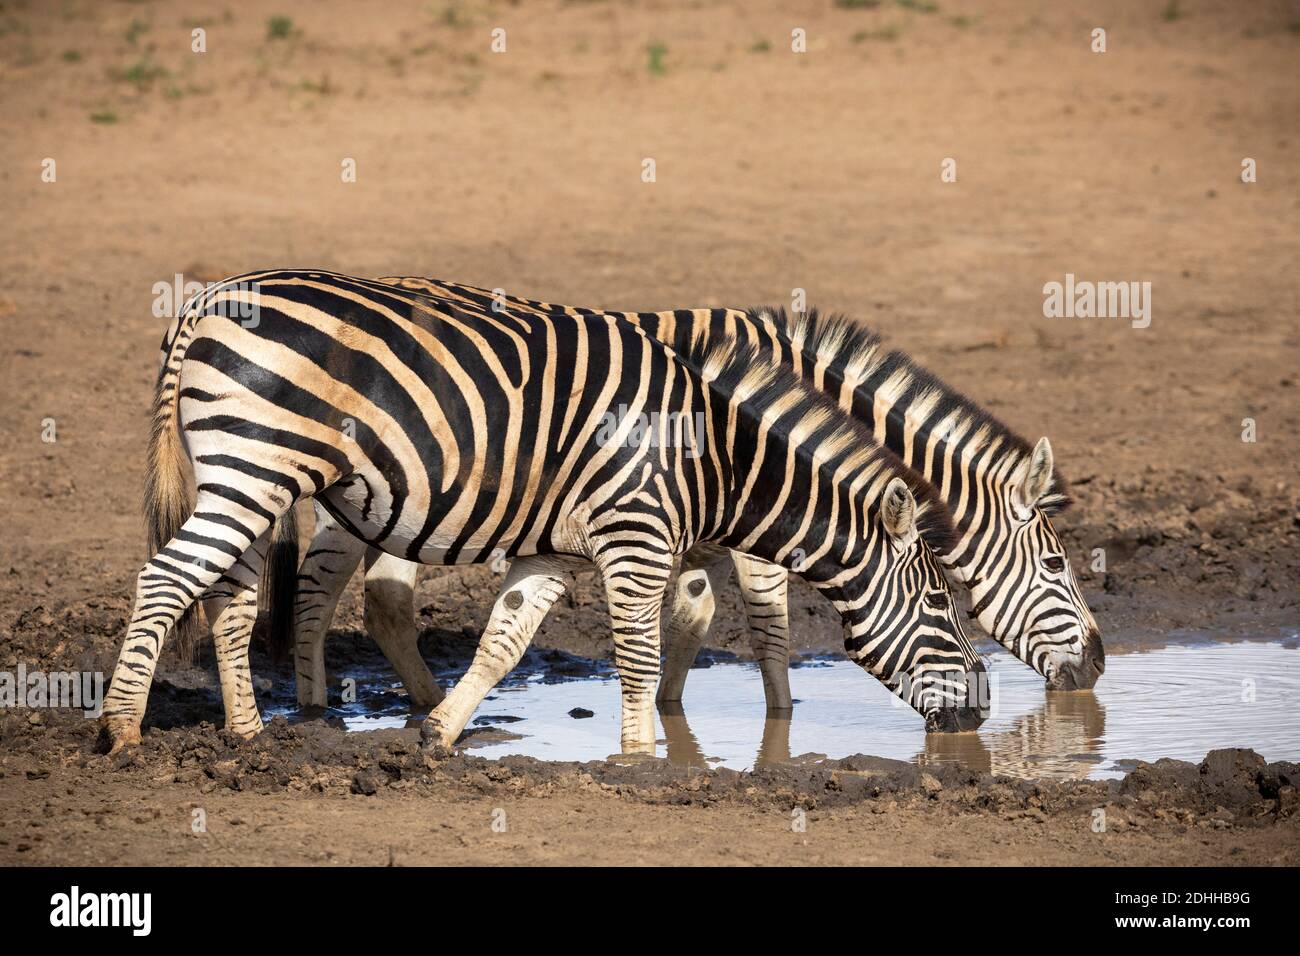 Two adult zebras standing at the edge of a waterhole drinking water in Kruger Park in South Africa Stock Photo